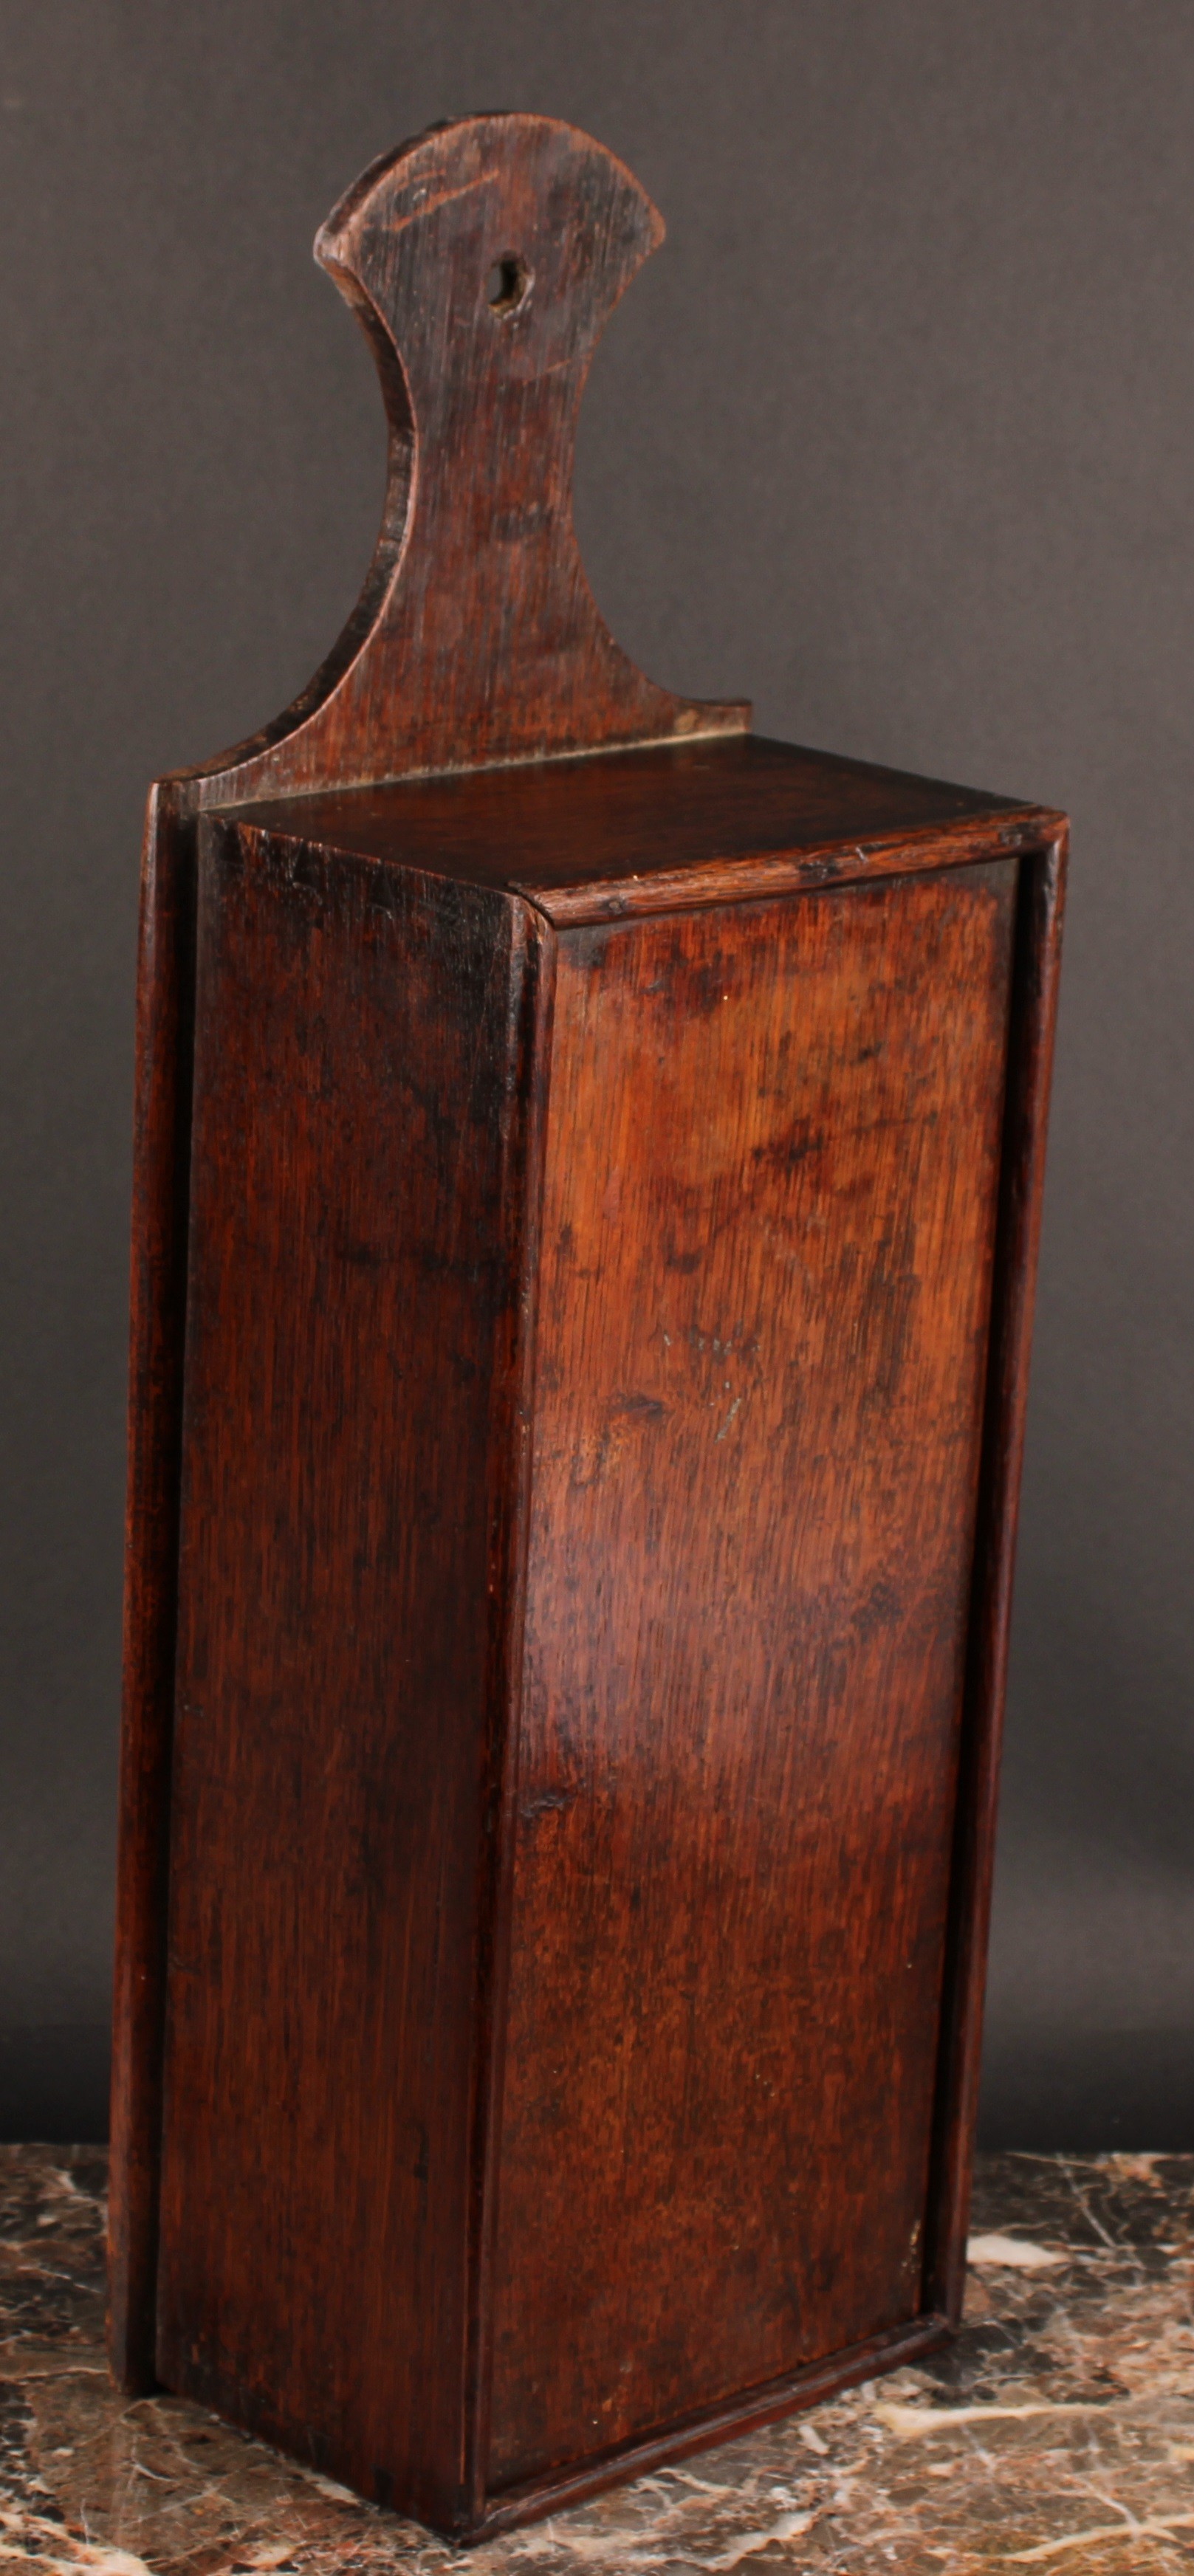 A George III oak candle box, axe-head shaped cresting, sliding cover, 50cm high, c.1800 - Image 2 of 3